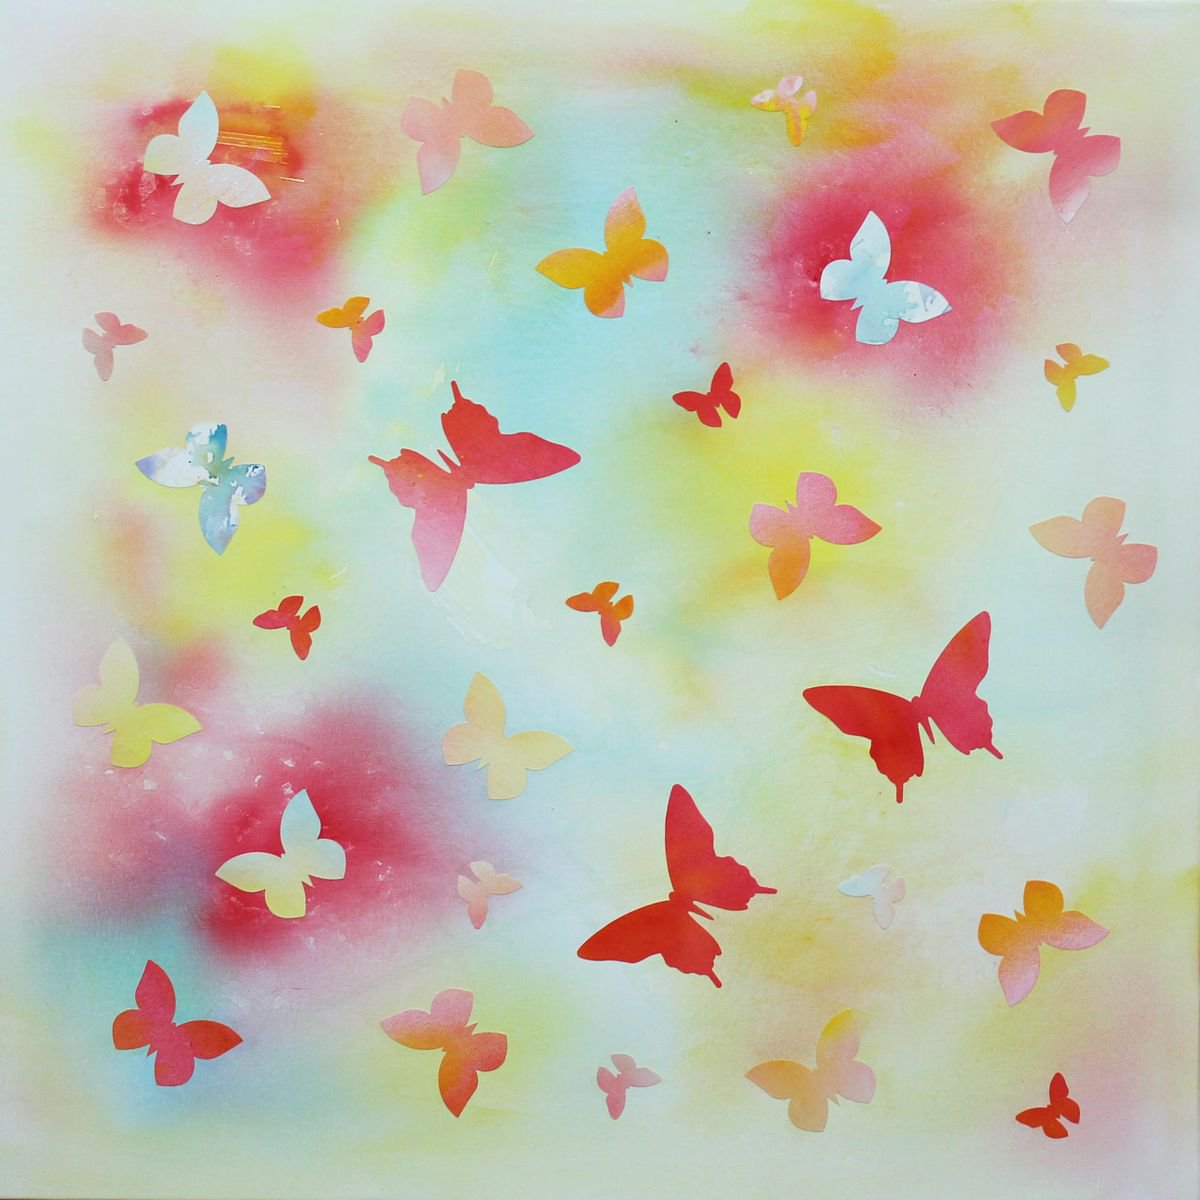 Summer Memories/ Butterfly collage by Paresh Nrshinga